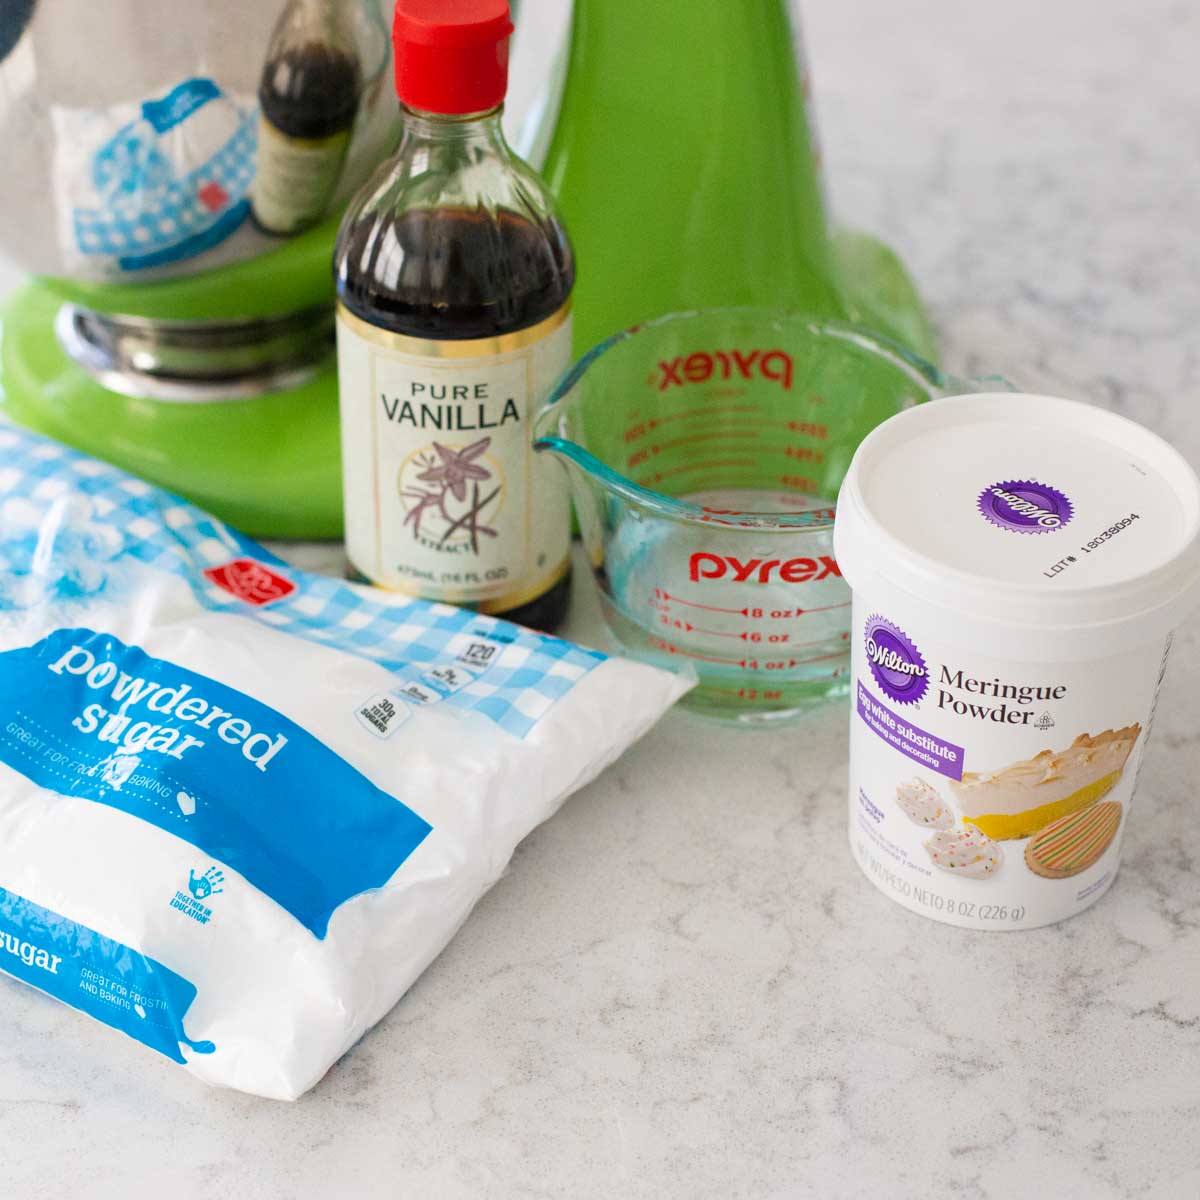 The simple ingredients to make royal icing for cookies are next to the stand mixer.